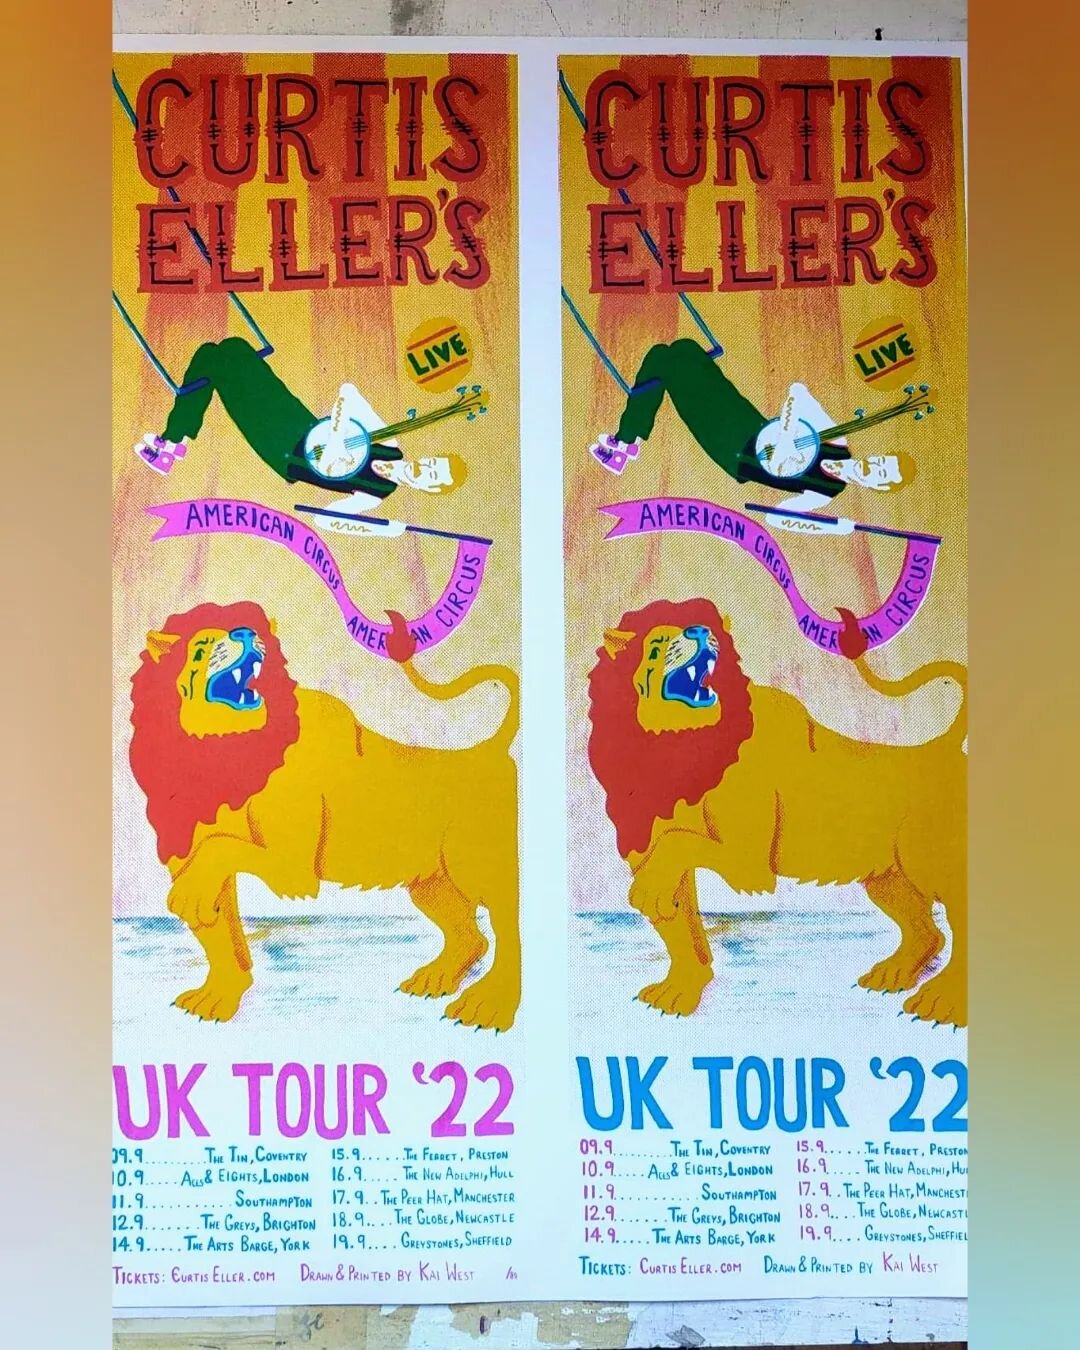 Dig these groovy, new posters for my UK tour! Designed and screen printed by Kai West! Available exclusively on the meech table! 🪕🎪
---
#curtiseller #curtisellersamericancircus #uktour #poster #screenprinting #circus #lion #banjo #banjomusic #kaiwe